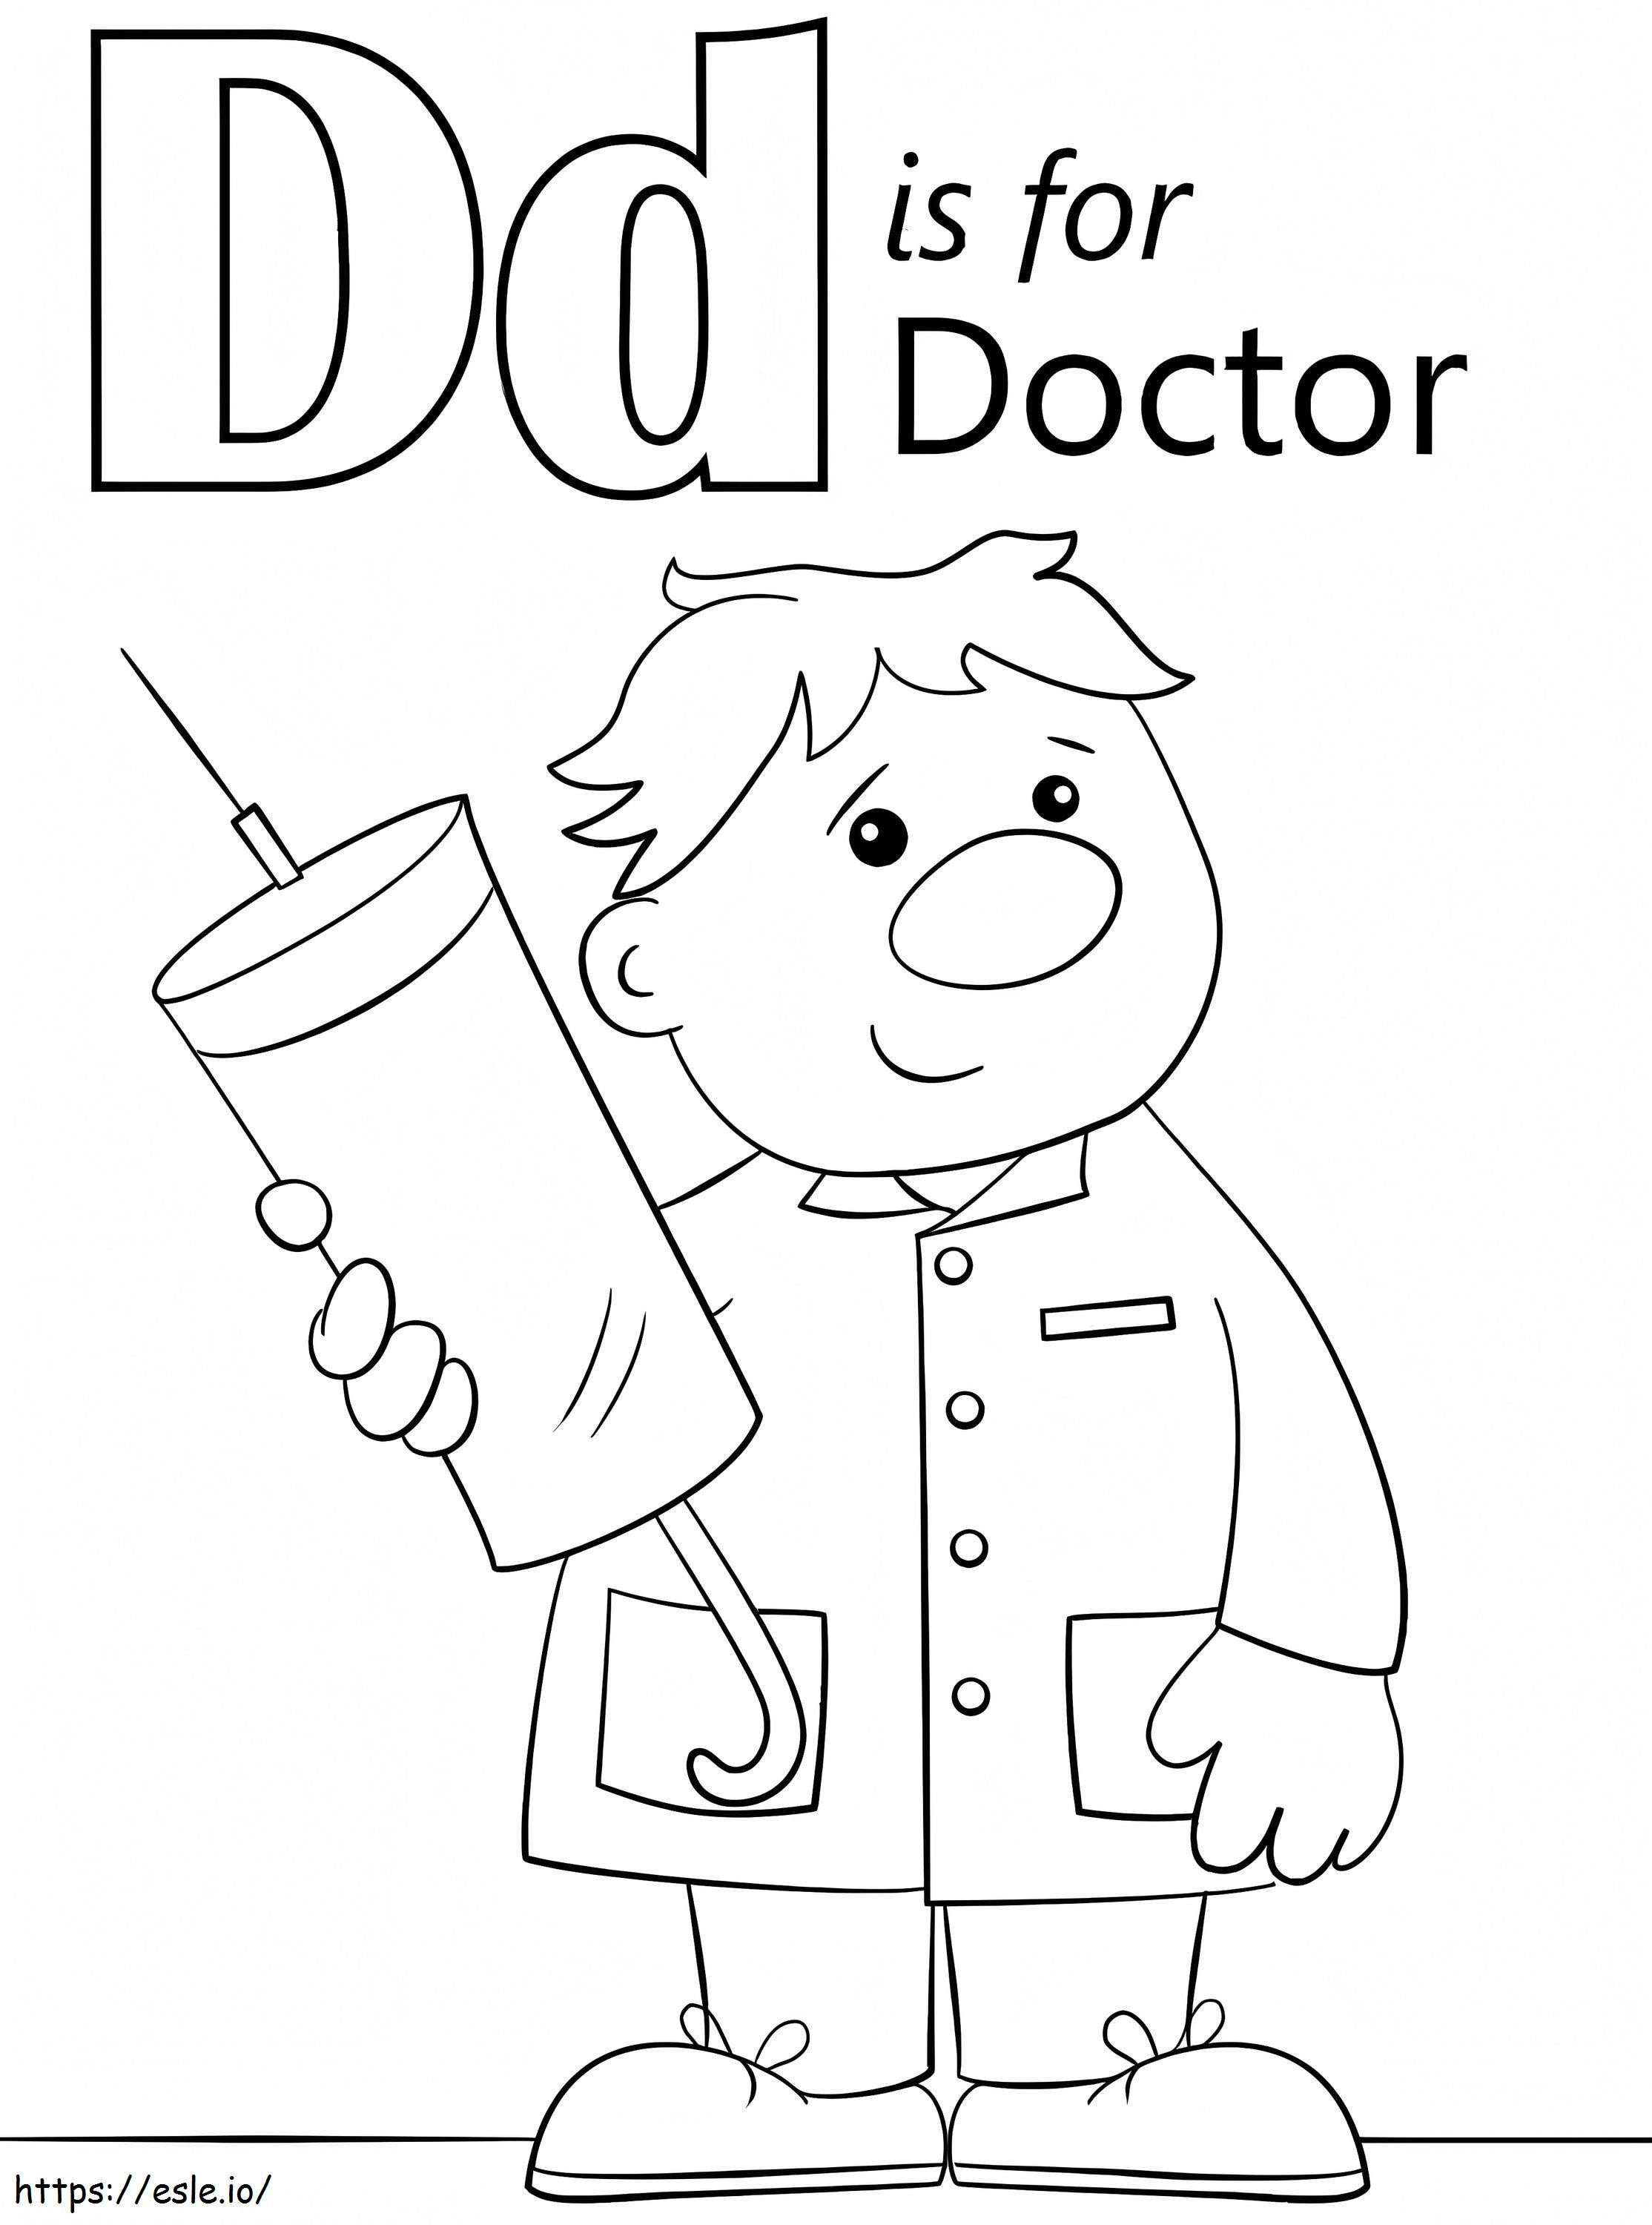 Doctor Letter D coloring page